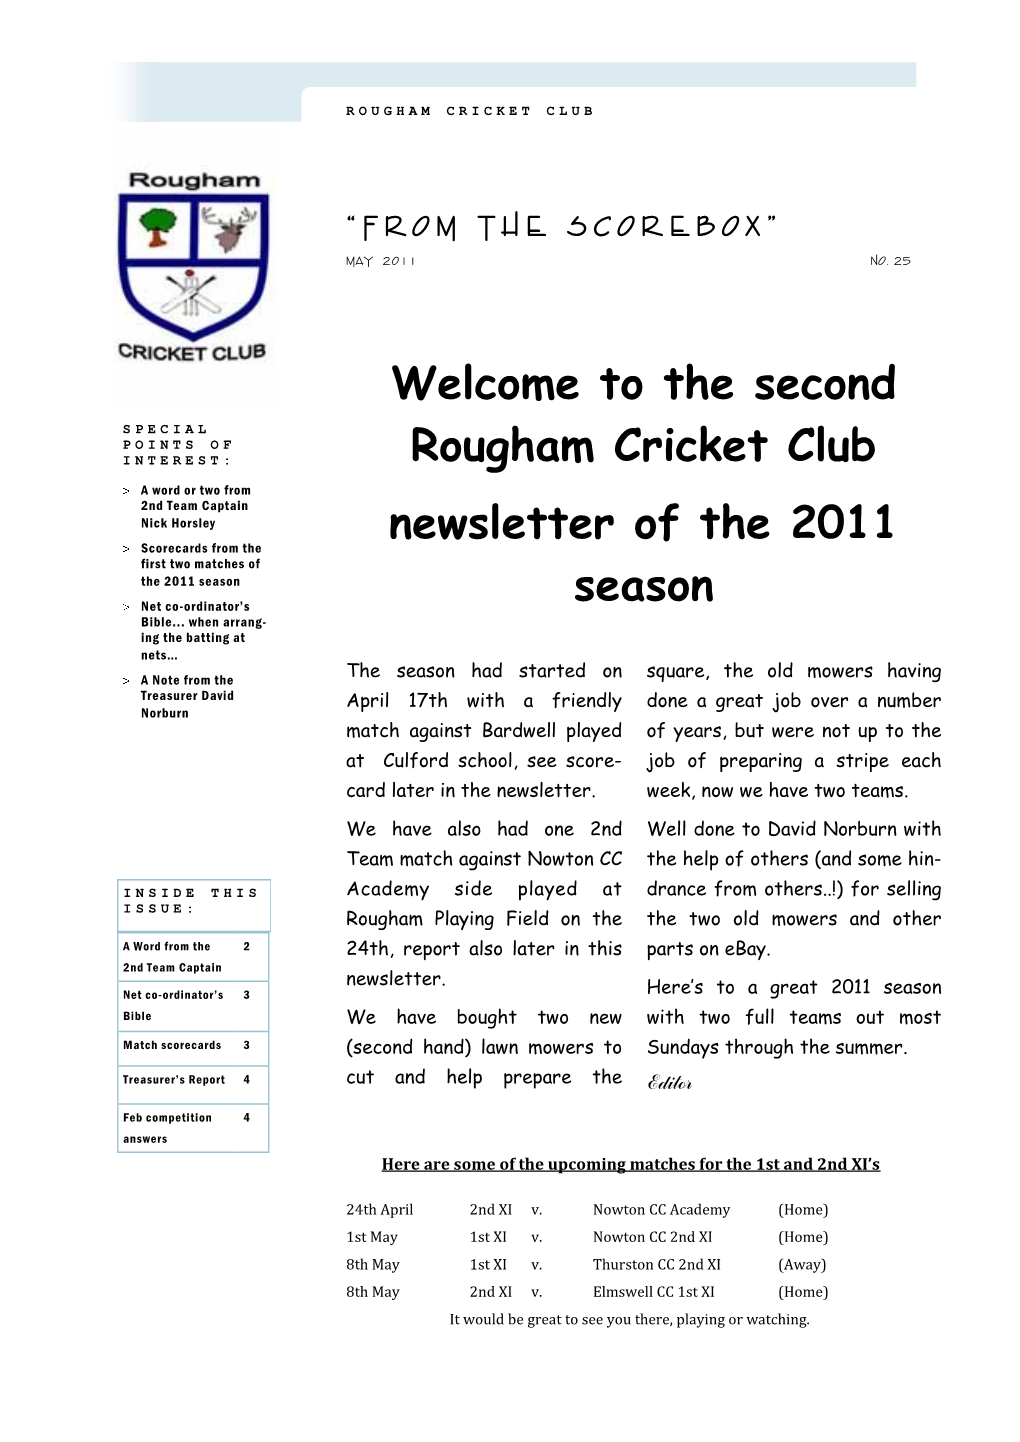 The Second Rougham Cricket Club Newsletter of the 2011 Season